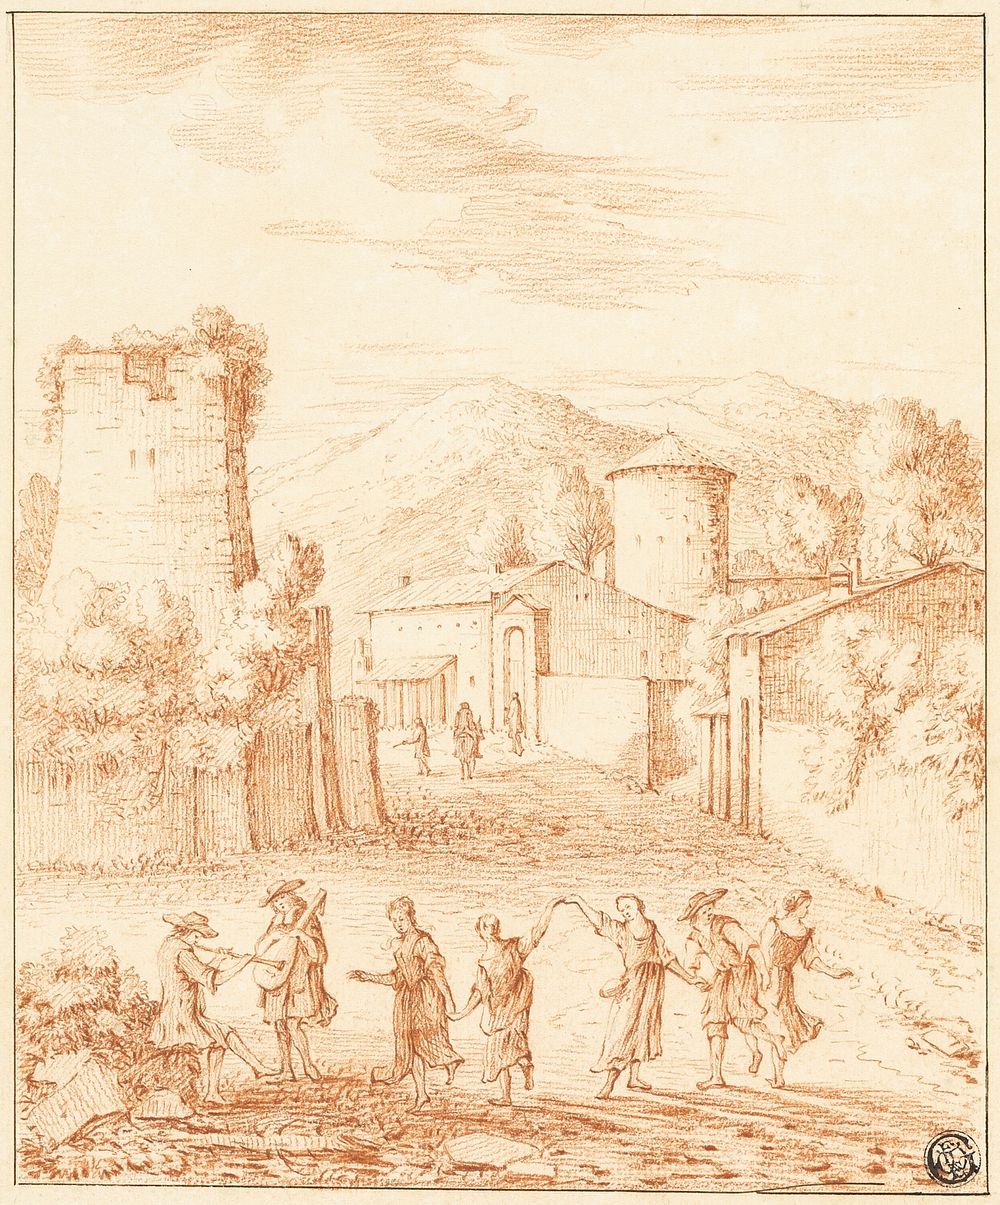 Dancers and Musicians Before Village with Ruined Tower by Claude Lorrain